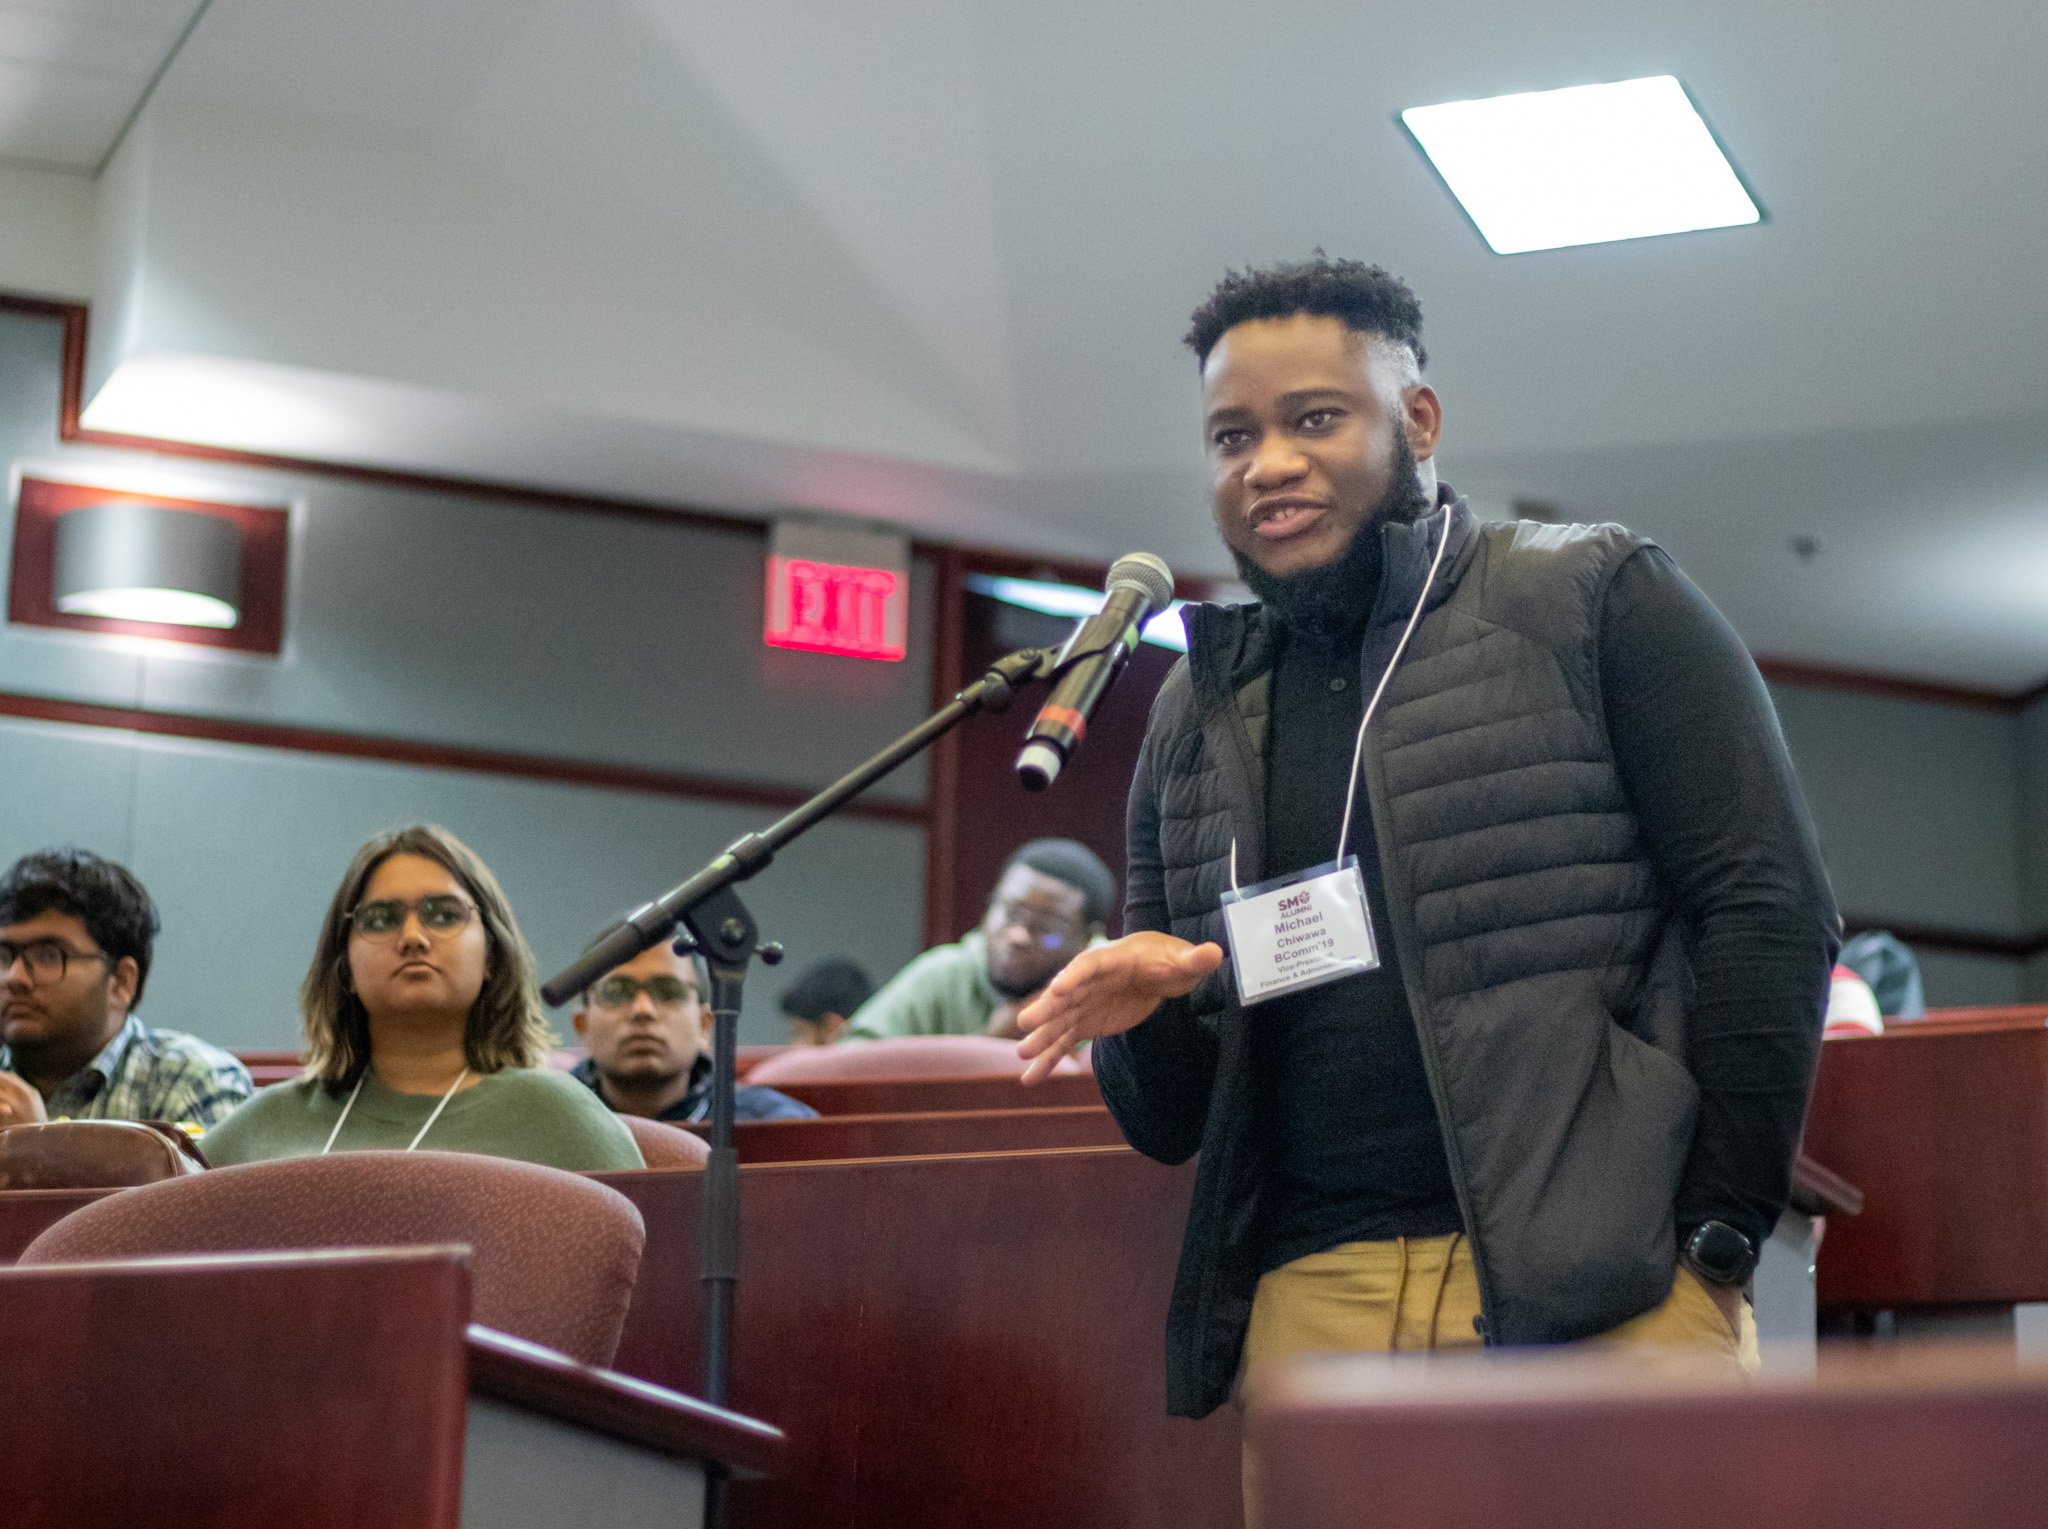  Alumni sparked discussion at the Artificial Intelligence panel event.  